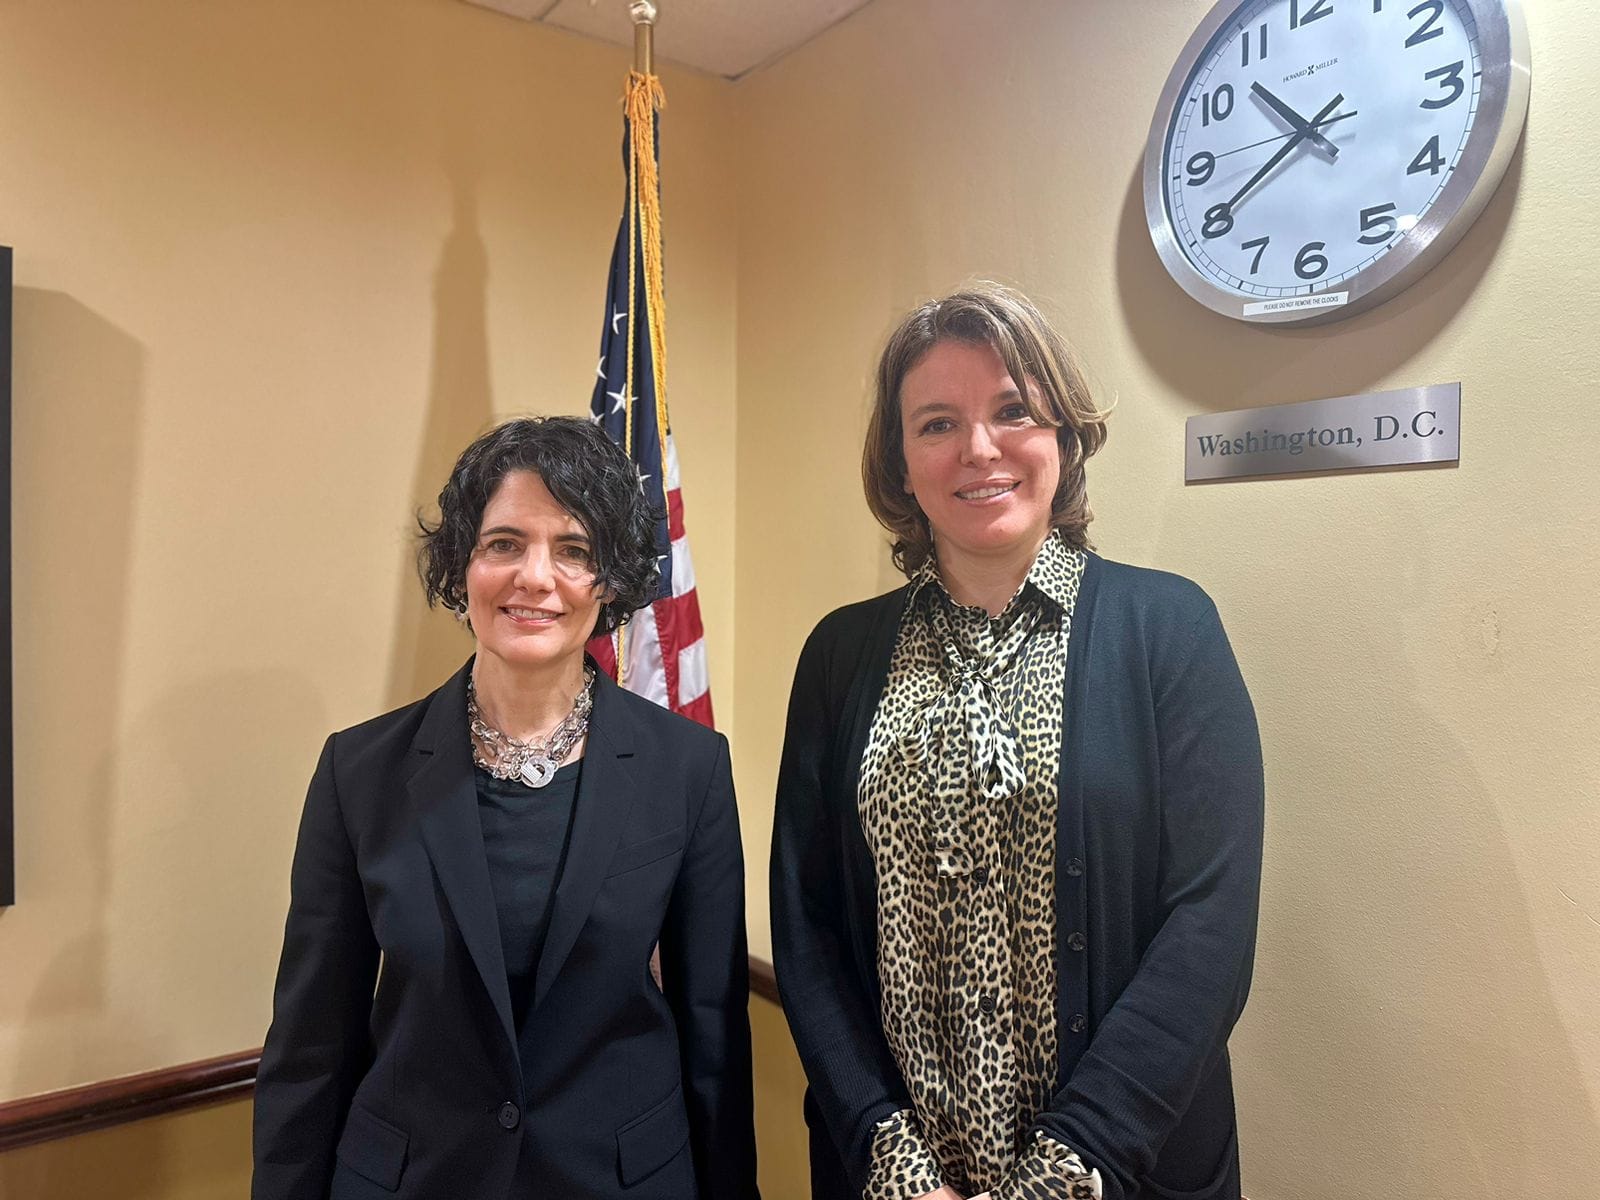 Sandra Borda, counselor for International Relations of Bogotá, also met with Nina Hachigian, the U.S. State Department's Special Representative for City and State Diplomacy,